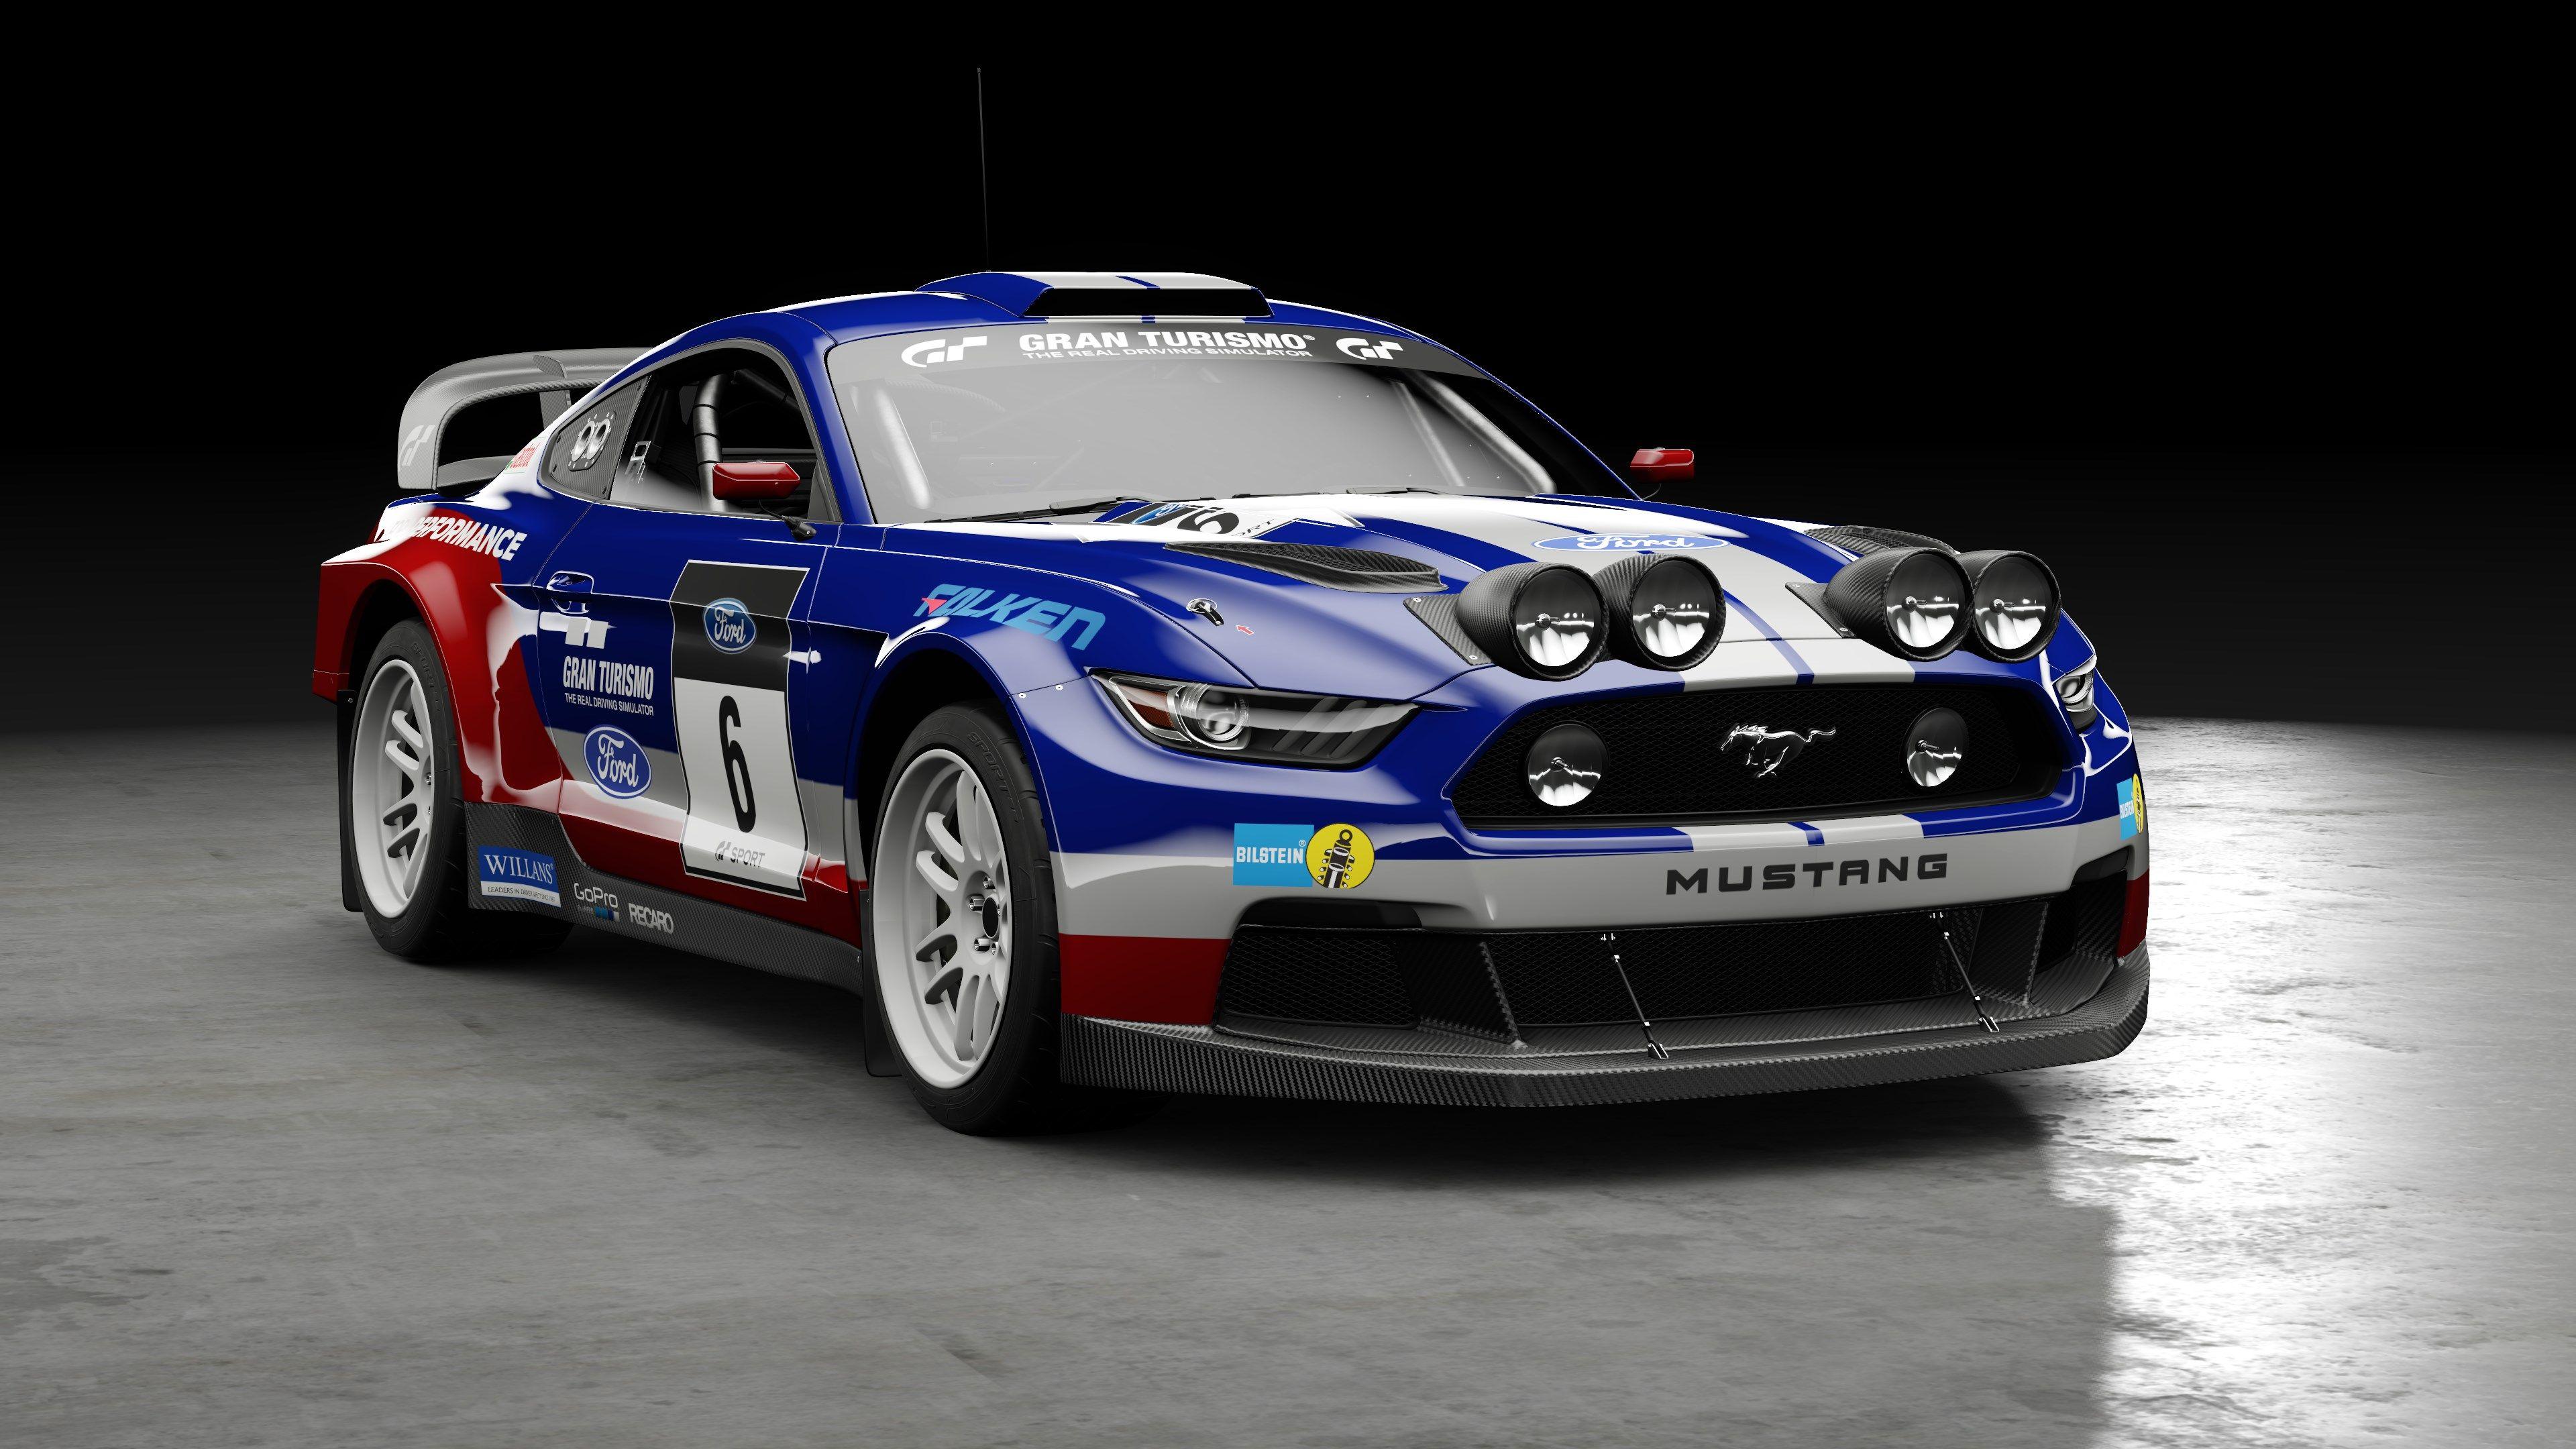 gran turismo sport 1080p high quality 1920x1080 Download Awesome